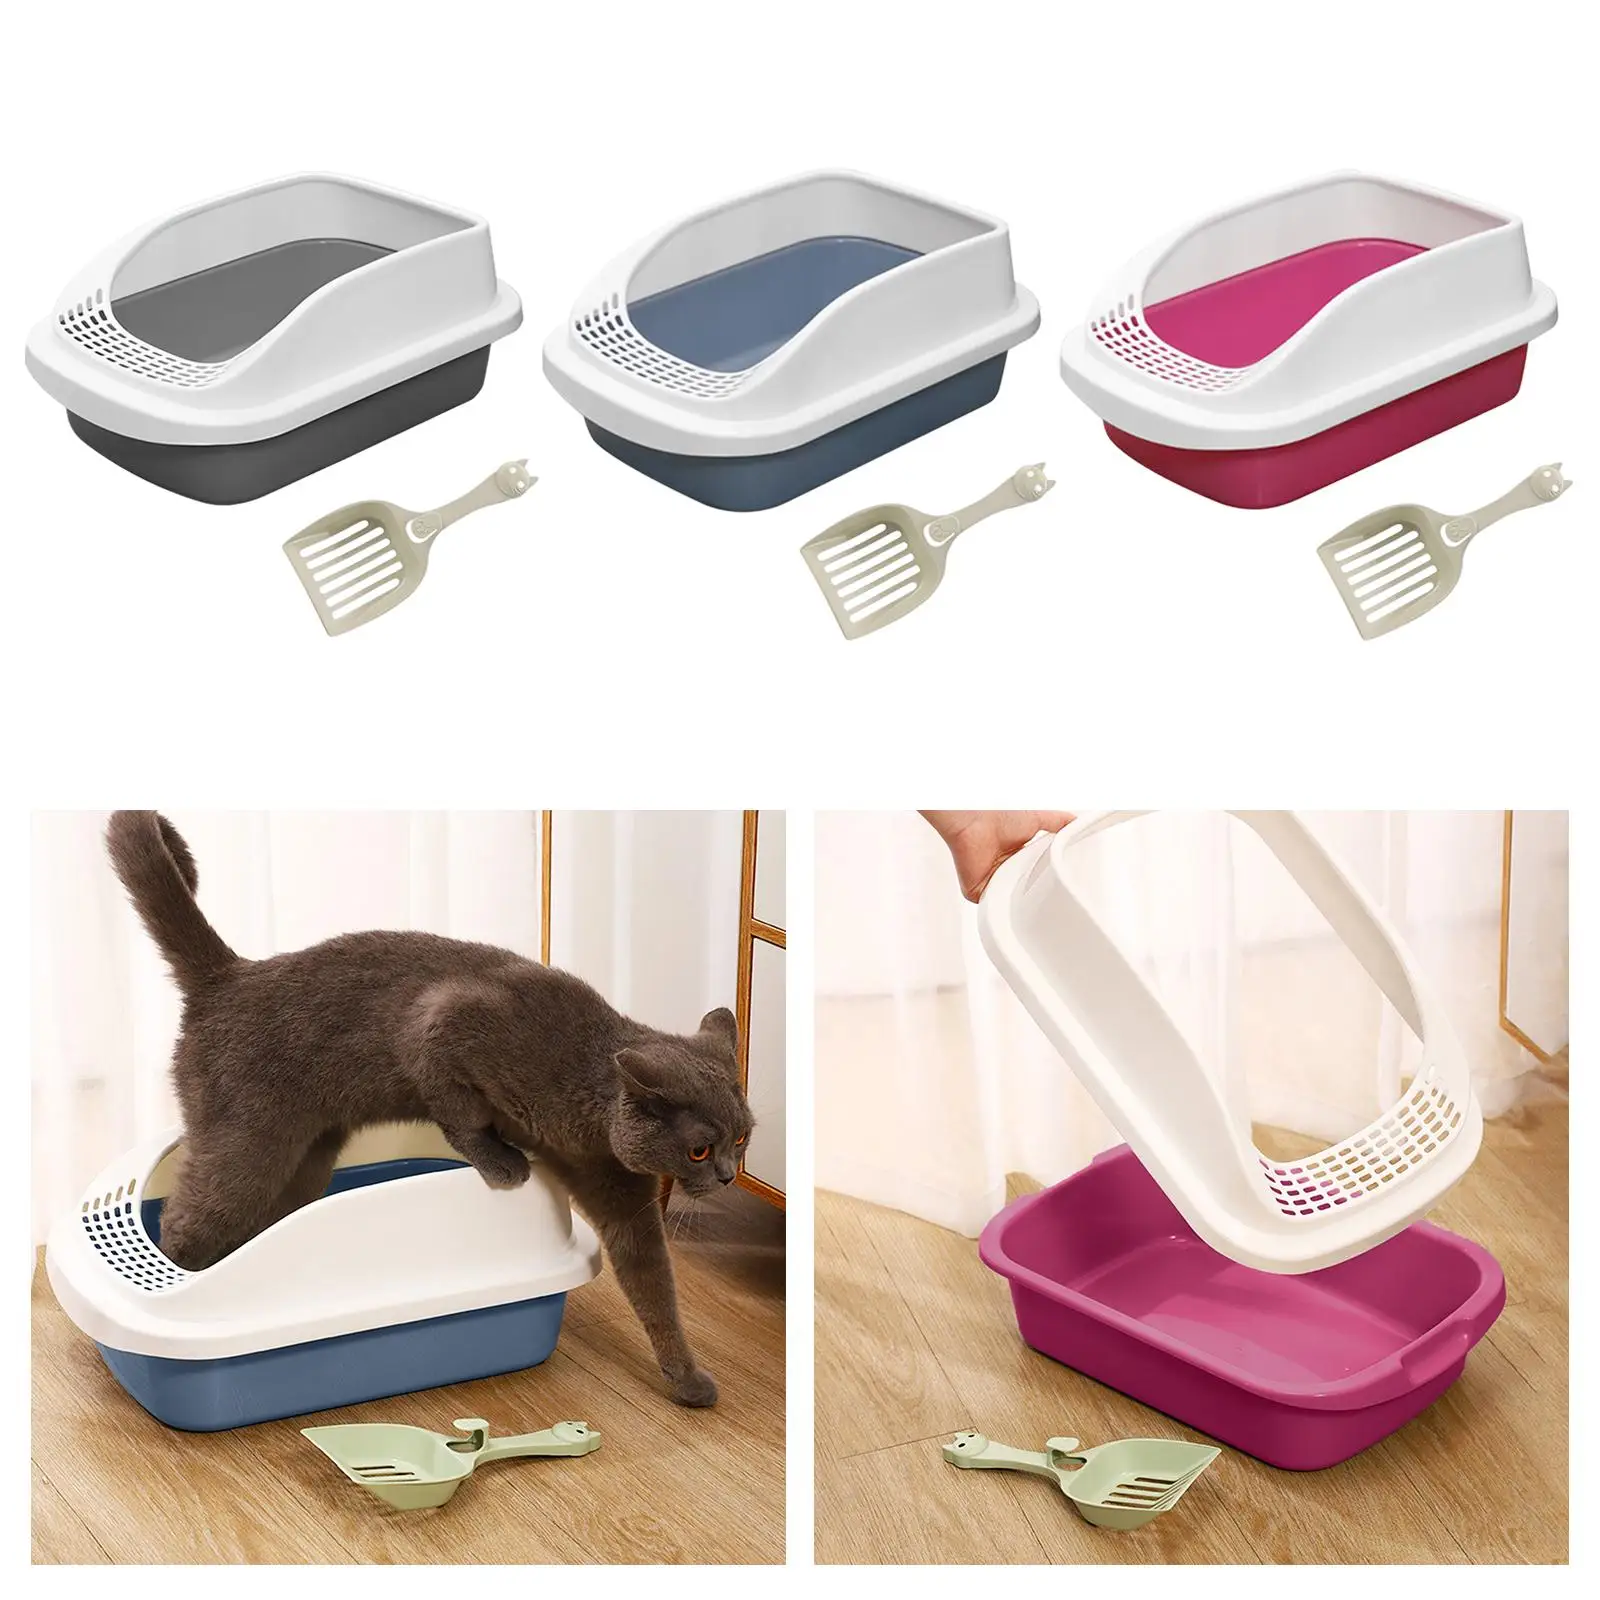 Pets Litter Trays Deep Loo with Scoop Cage Cat Litter Box Litter Pan for Kitten Rabbit Small and Medium Cats Bunny Small Animals